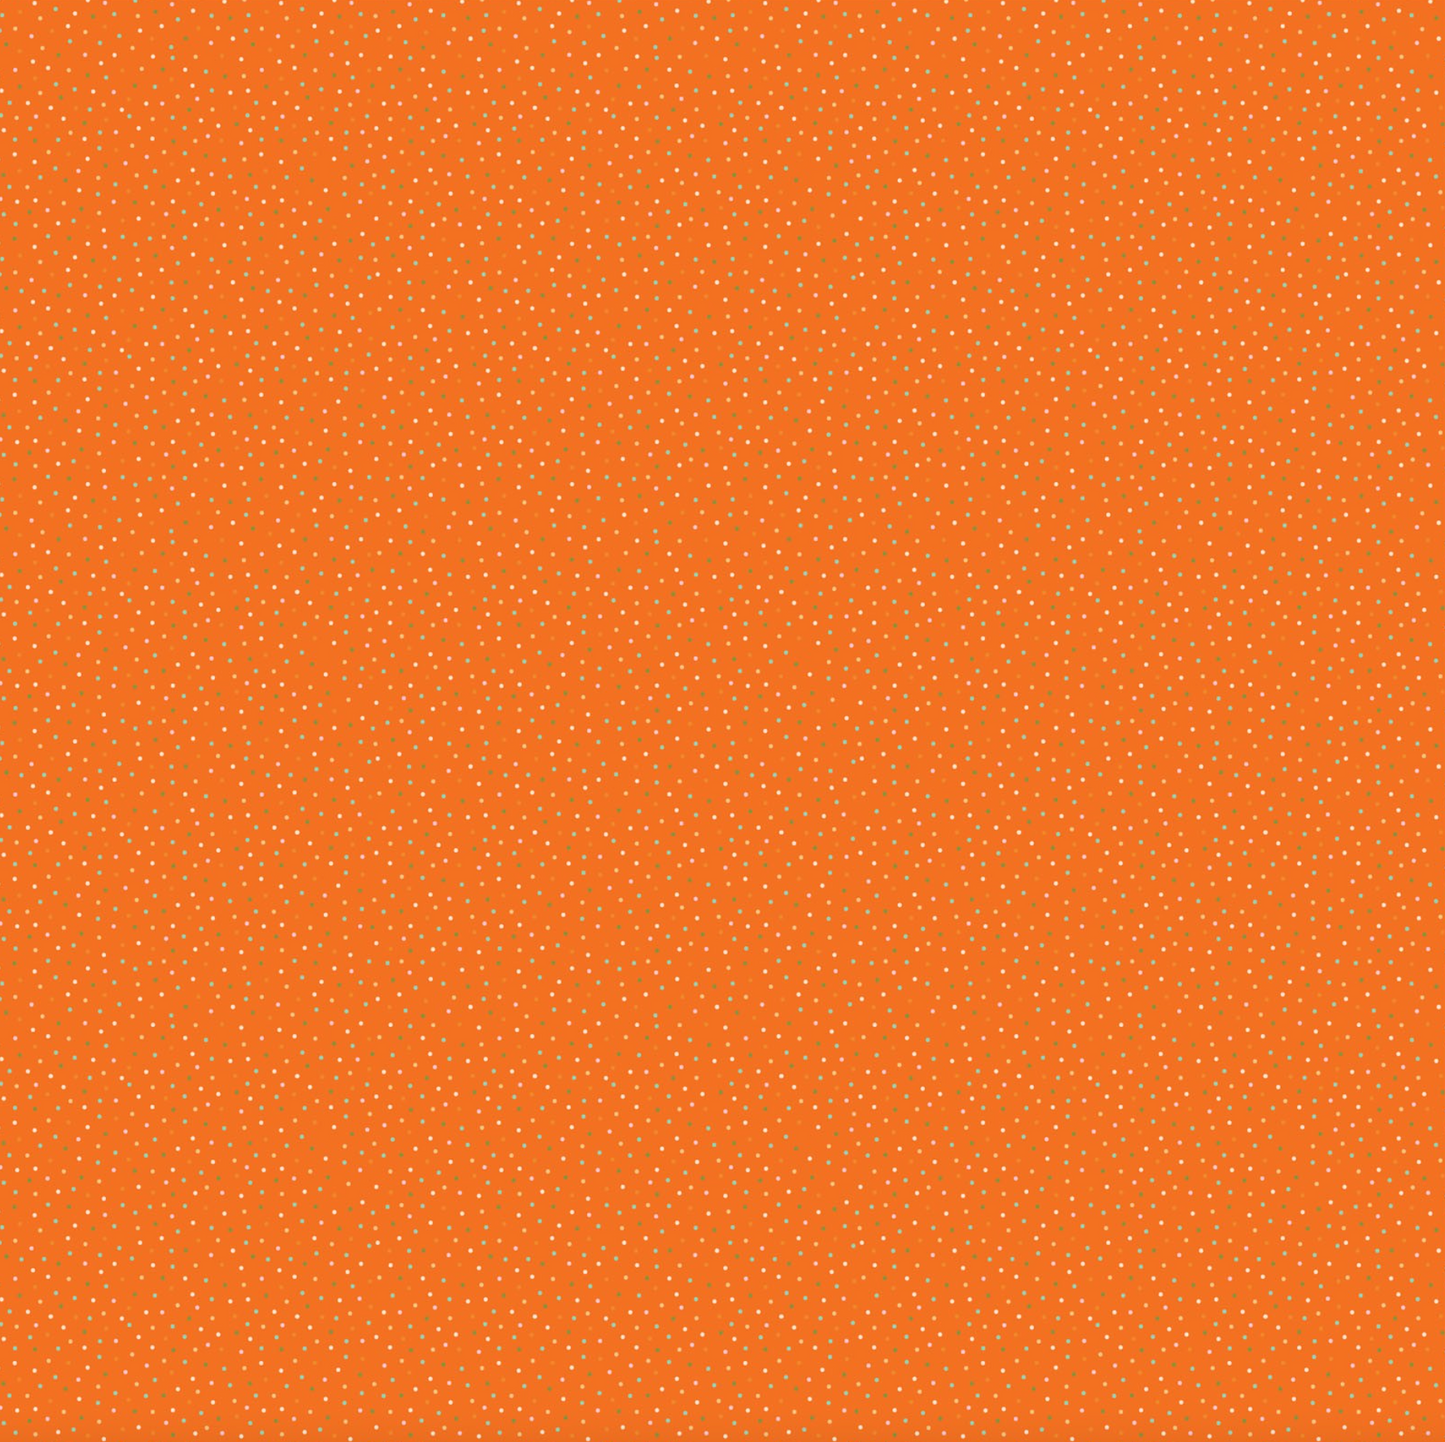 Country Confetti Brights, Creamsicle Bright Orange, CC20196, sold by the 1/2 yard